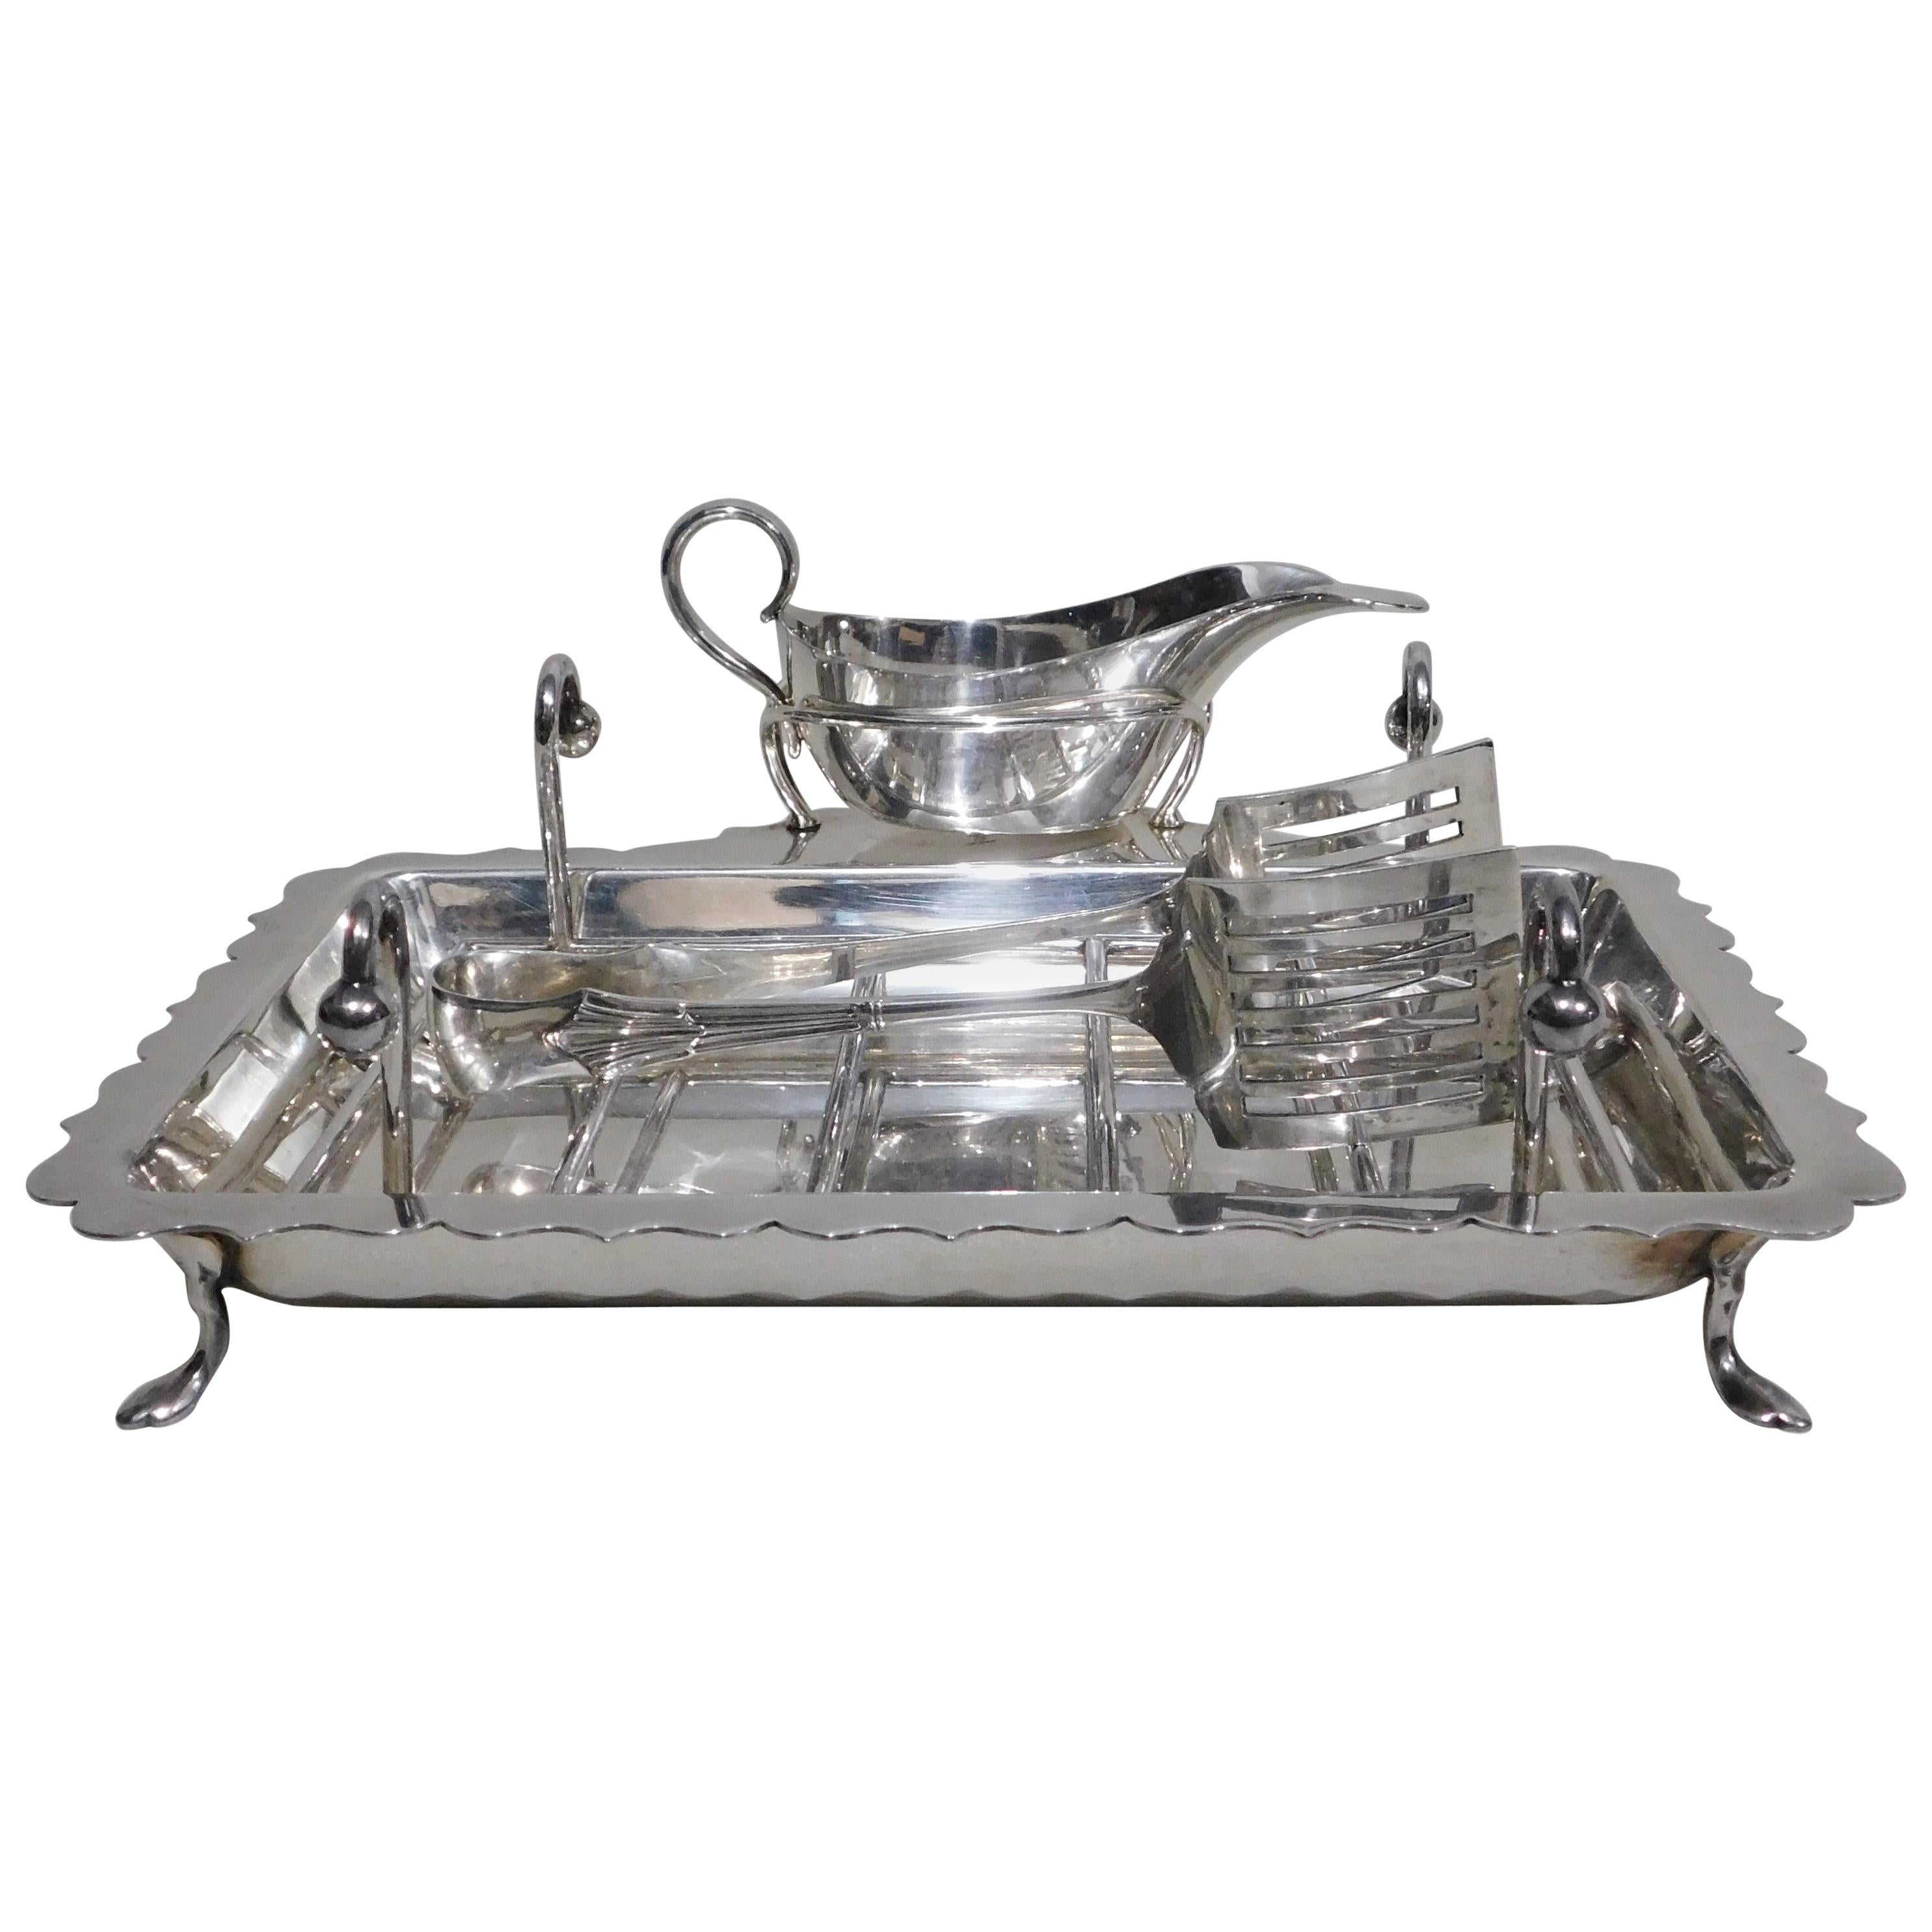 English circa 1925 Silver Plate Five-Piece Asparagus Stand and Serving Set